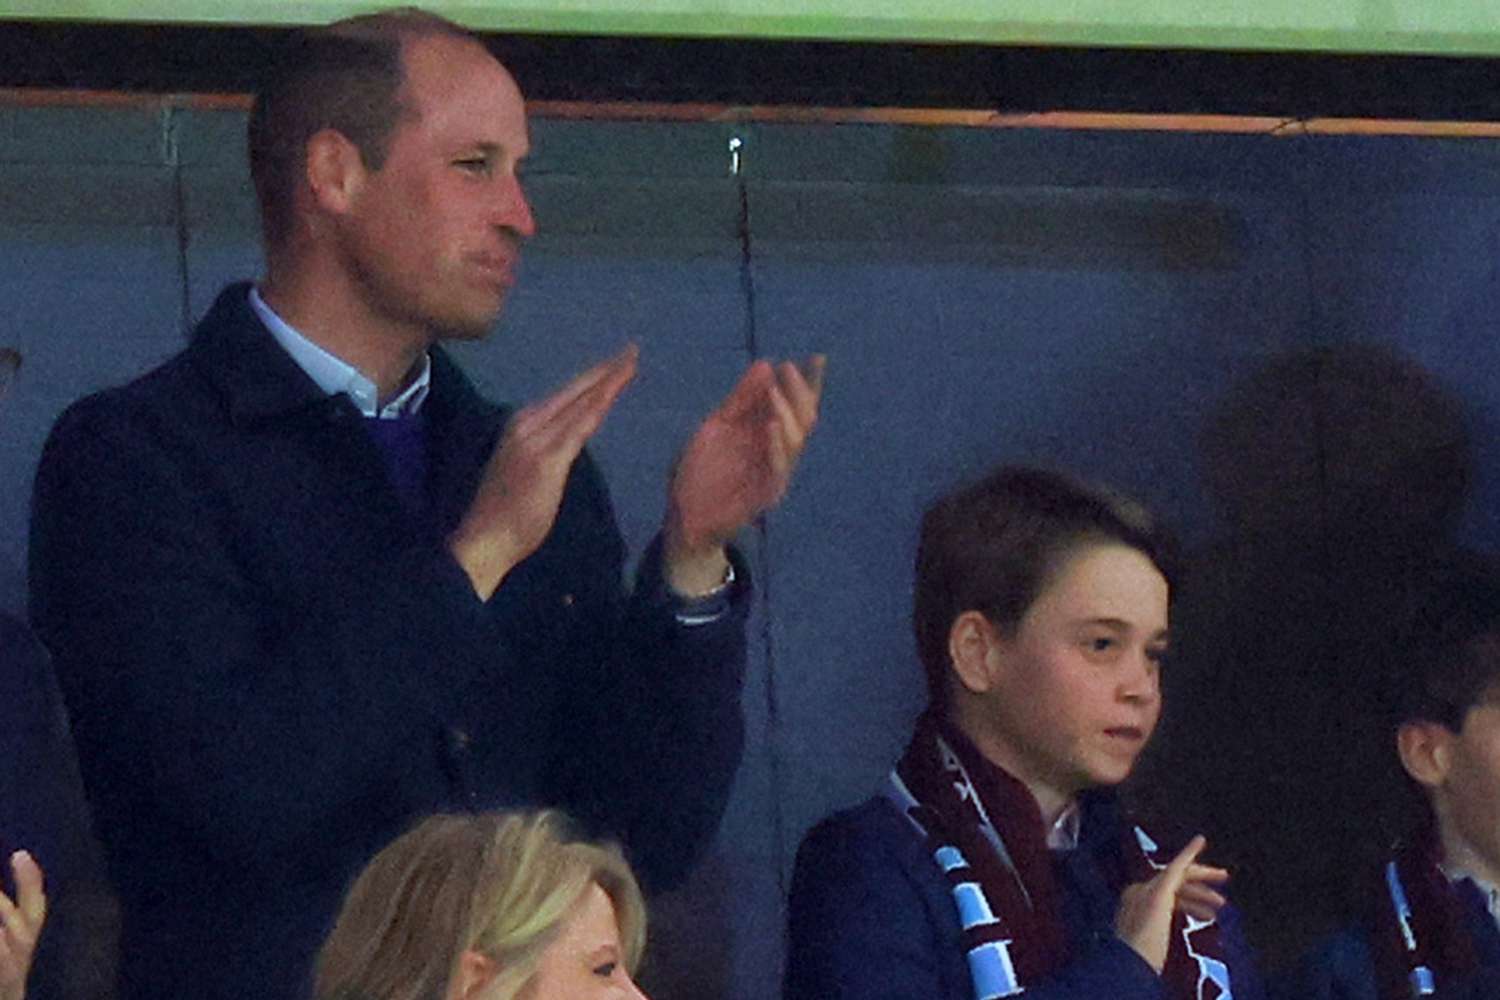 Prince William and Prince George Watch Soccer Game amid Kate’s Cancer Treatment [Video]